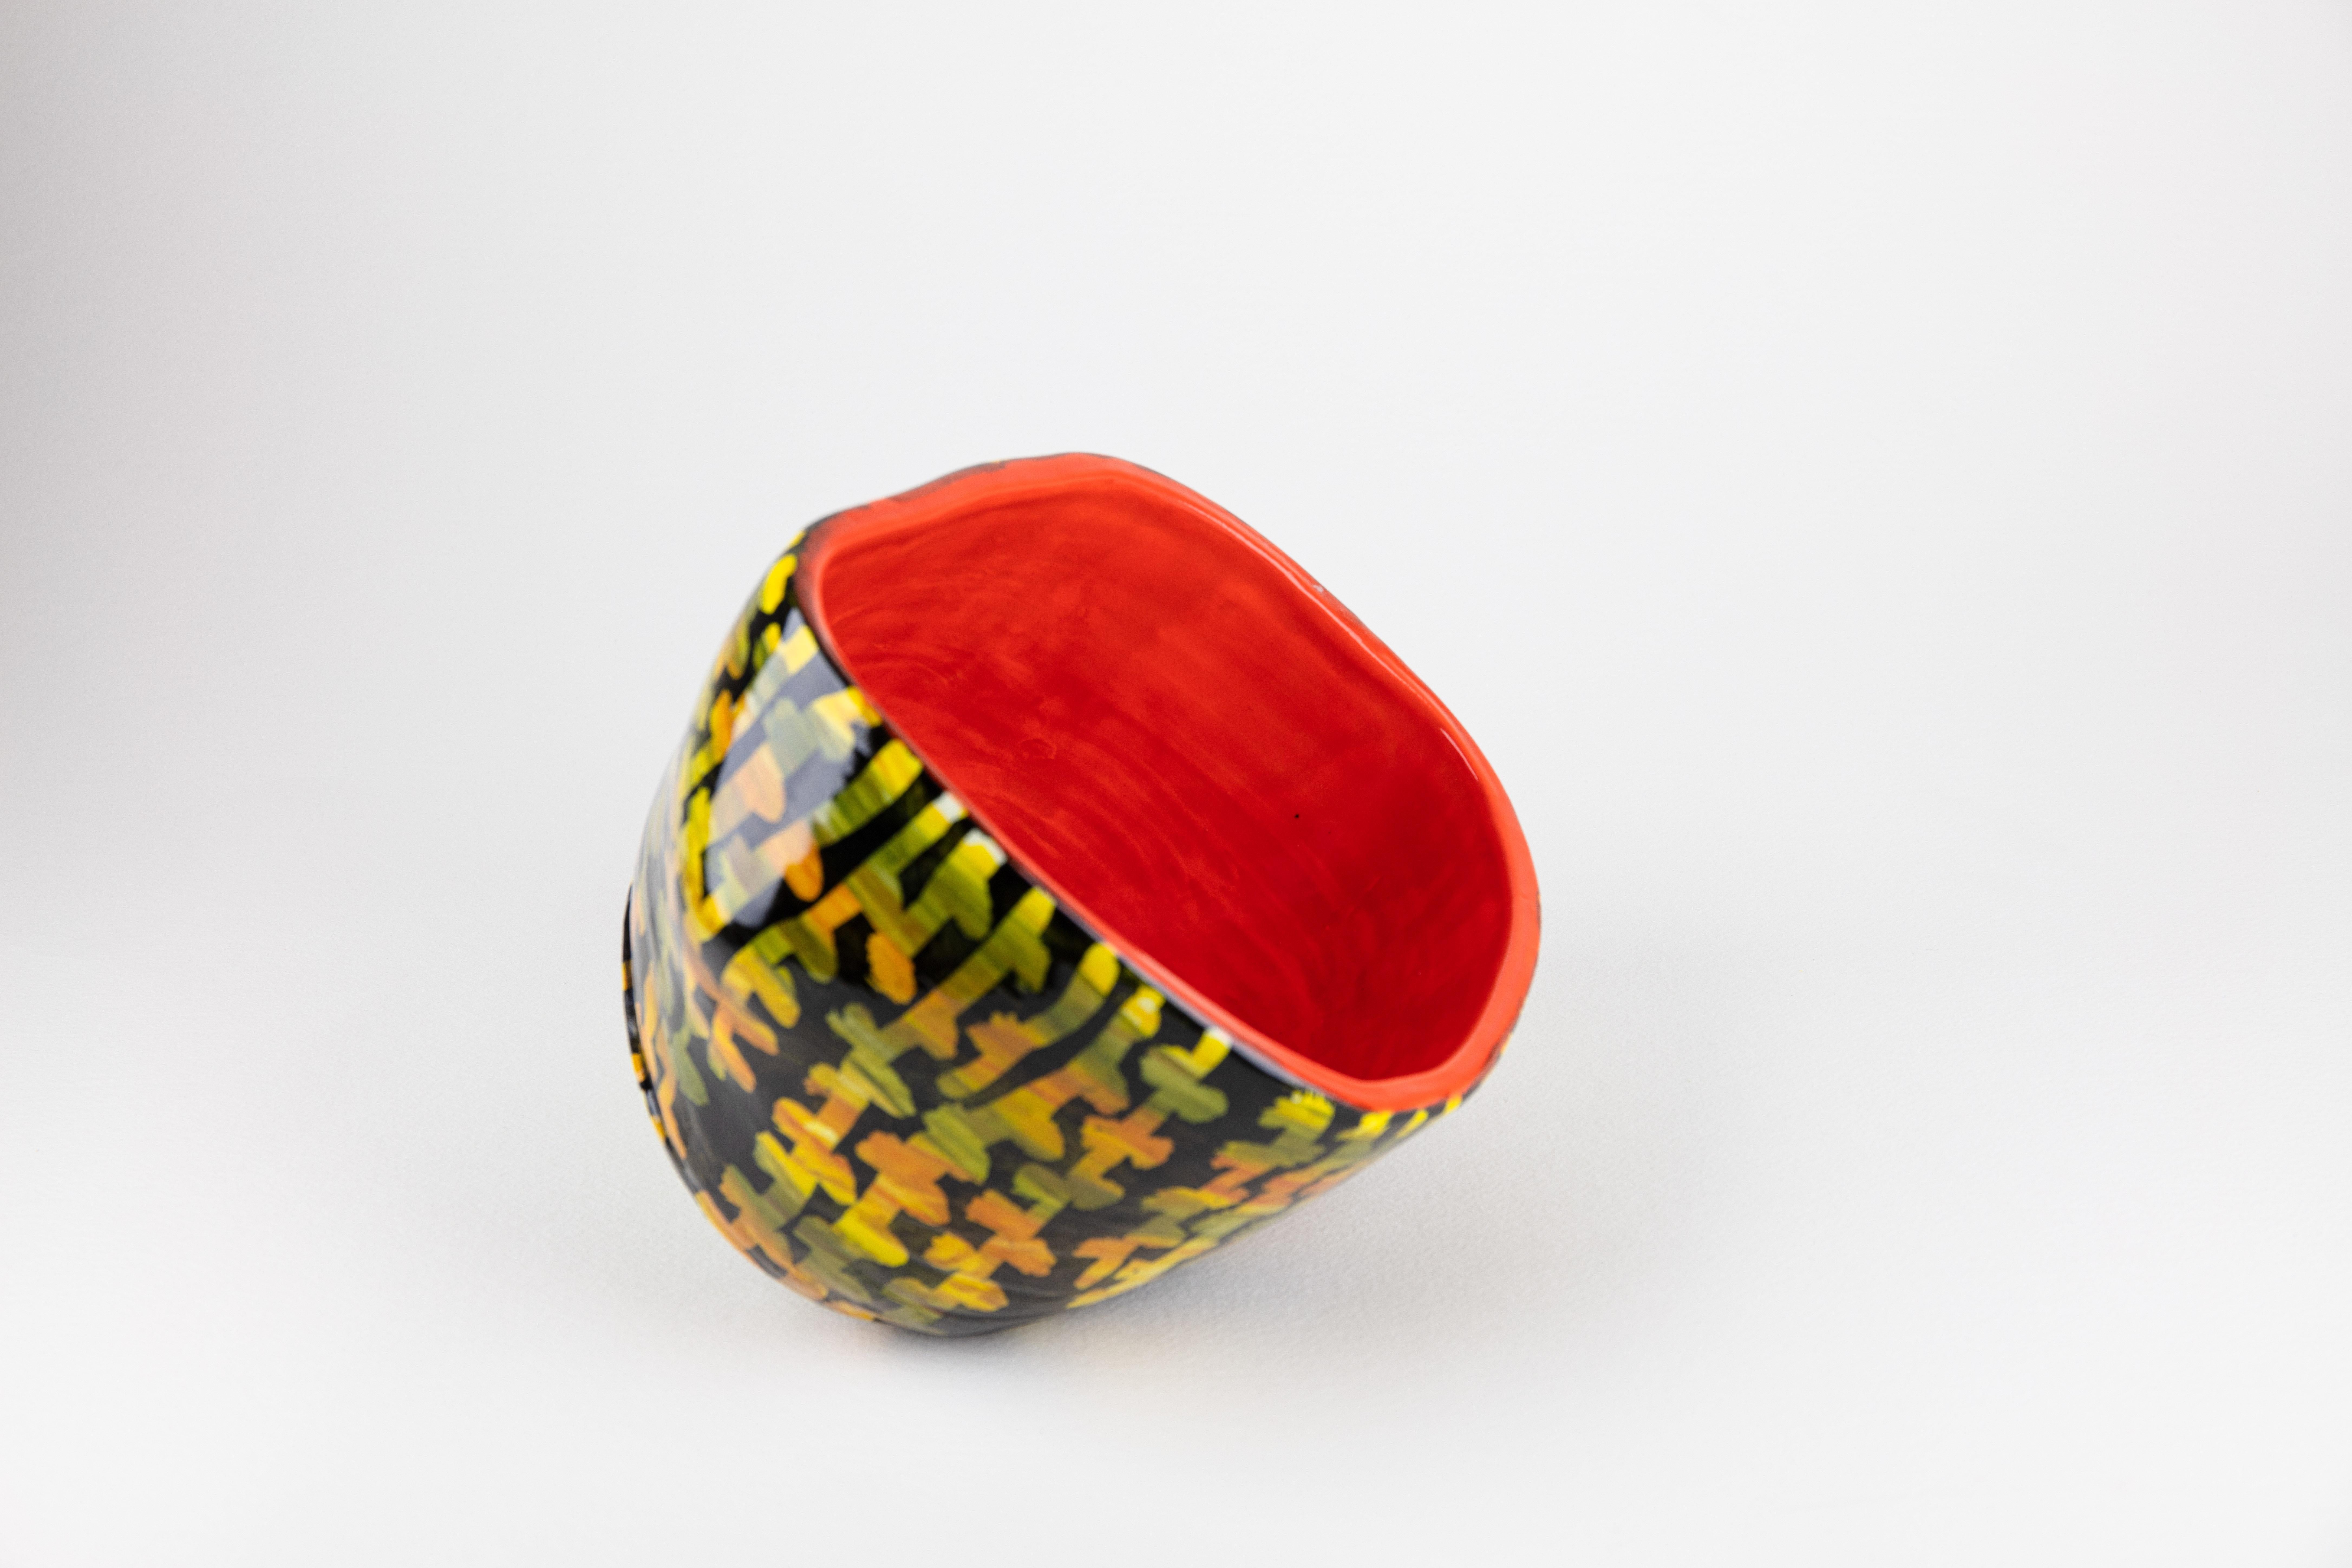 Husk 1, Abstract ceramic sculpture, red and yellow - Contemporary Sculpture by Rachelle Krieger